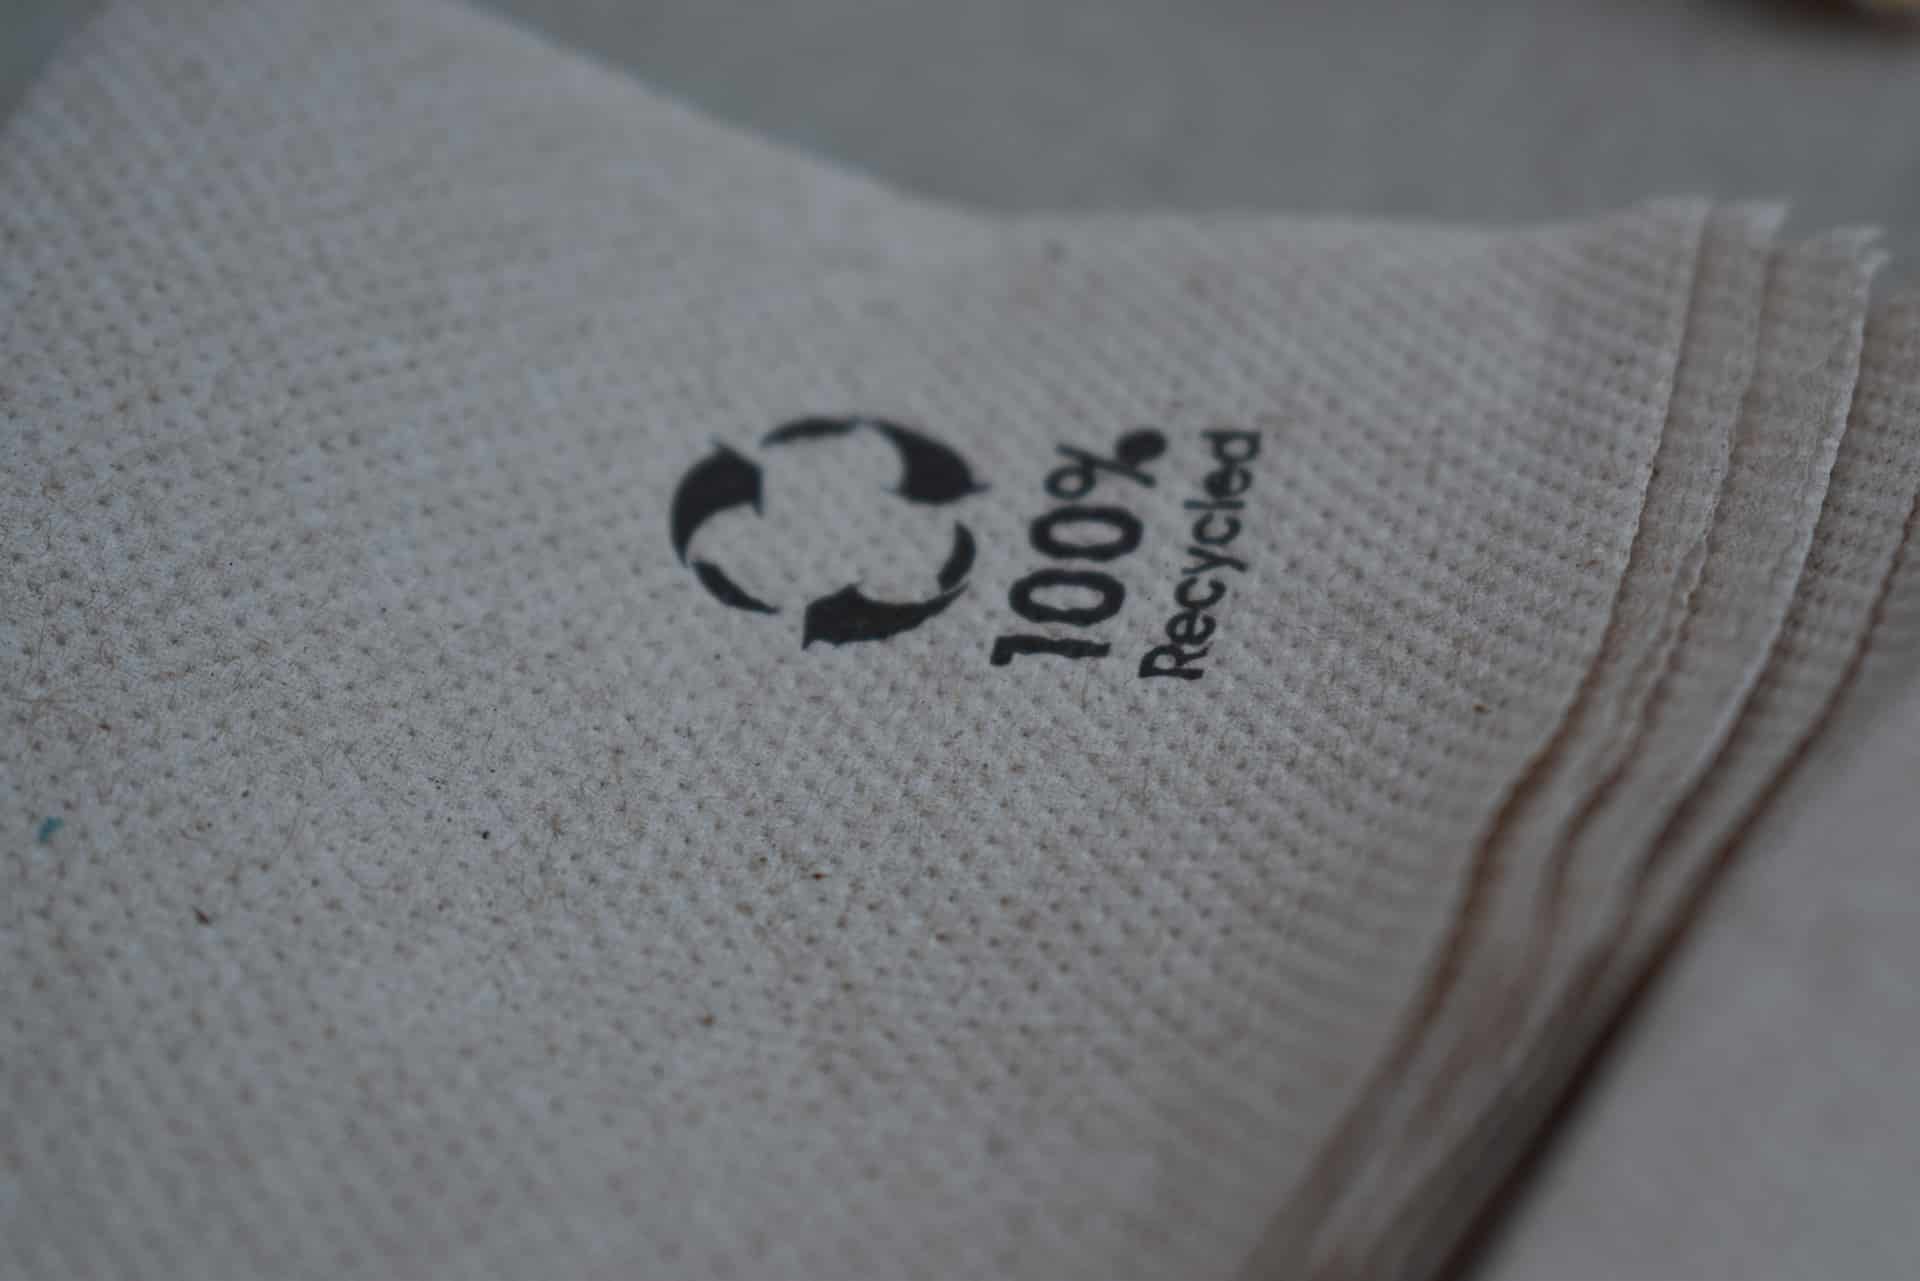 Close-up of a stack of brown paper napkins with a printed symbol indicating they are made from 100% recycled material. The recycling symbol is prominently visible on the top napkin.